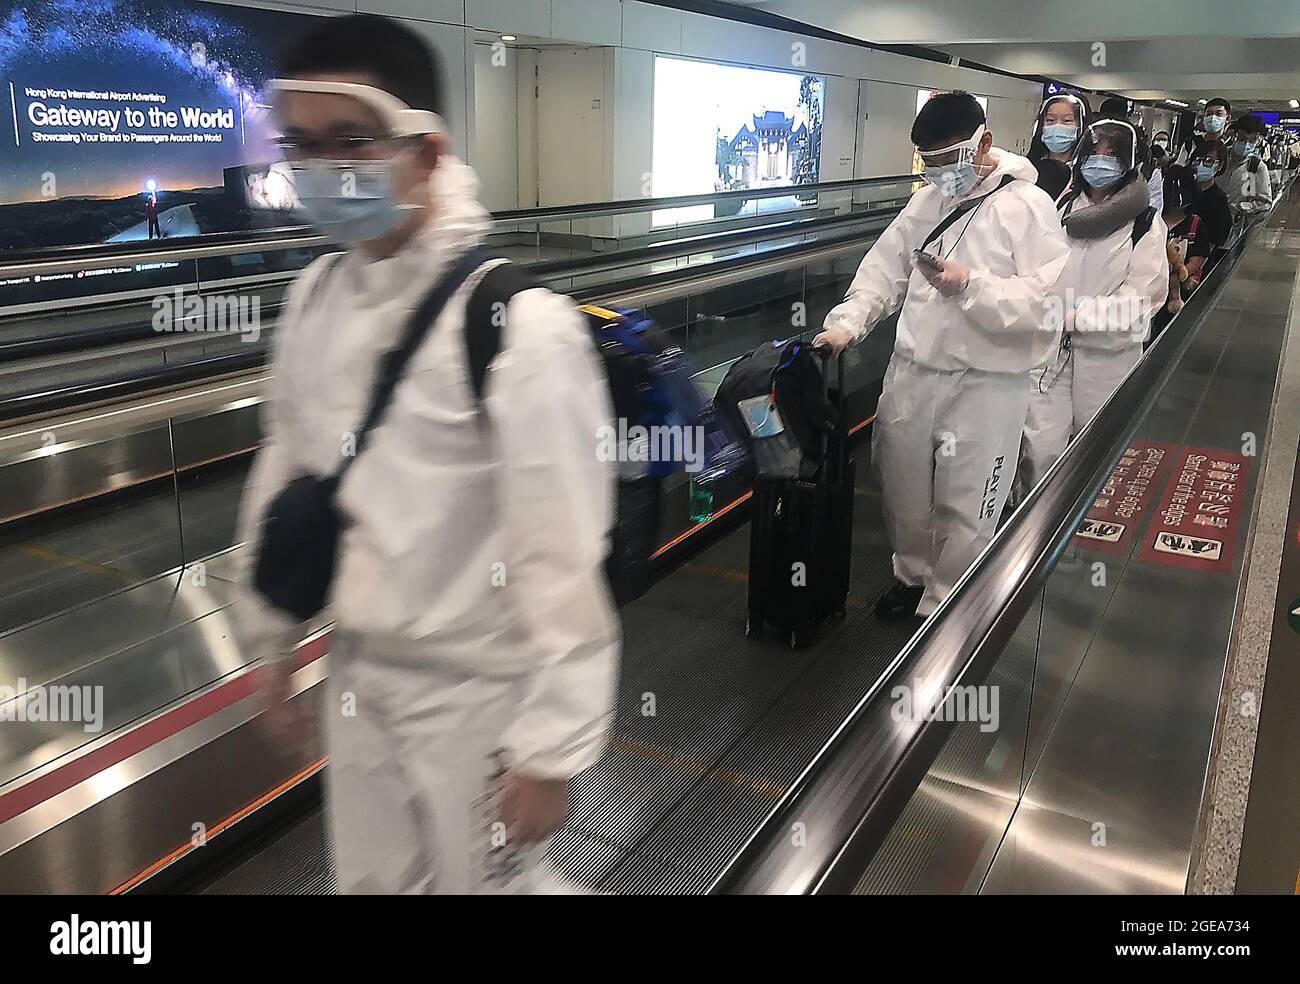 Hong Kong, China. 18th Aug, 2021. Passengers wear full body personal protective equipment (PPE) while transiting through Hong Kong's international airport on Wednesday, August 18, 2021. Hong Kong remains on high alert for the threat of a new Covid outbreak as it remains a major travel hub and destination in Asia. Photo by Stephen Shaver/UPI Credit: UPI/Alamy Live News Stock Photo